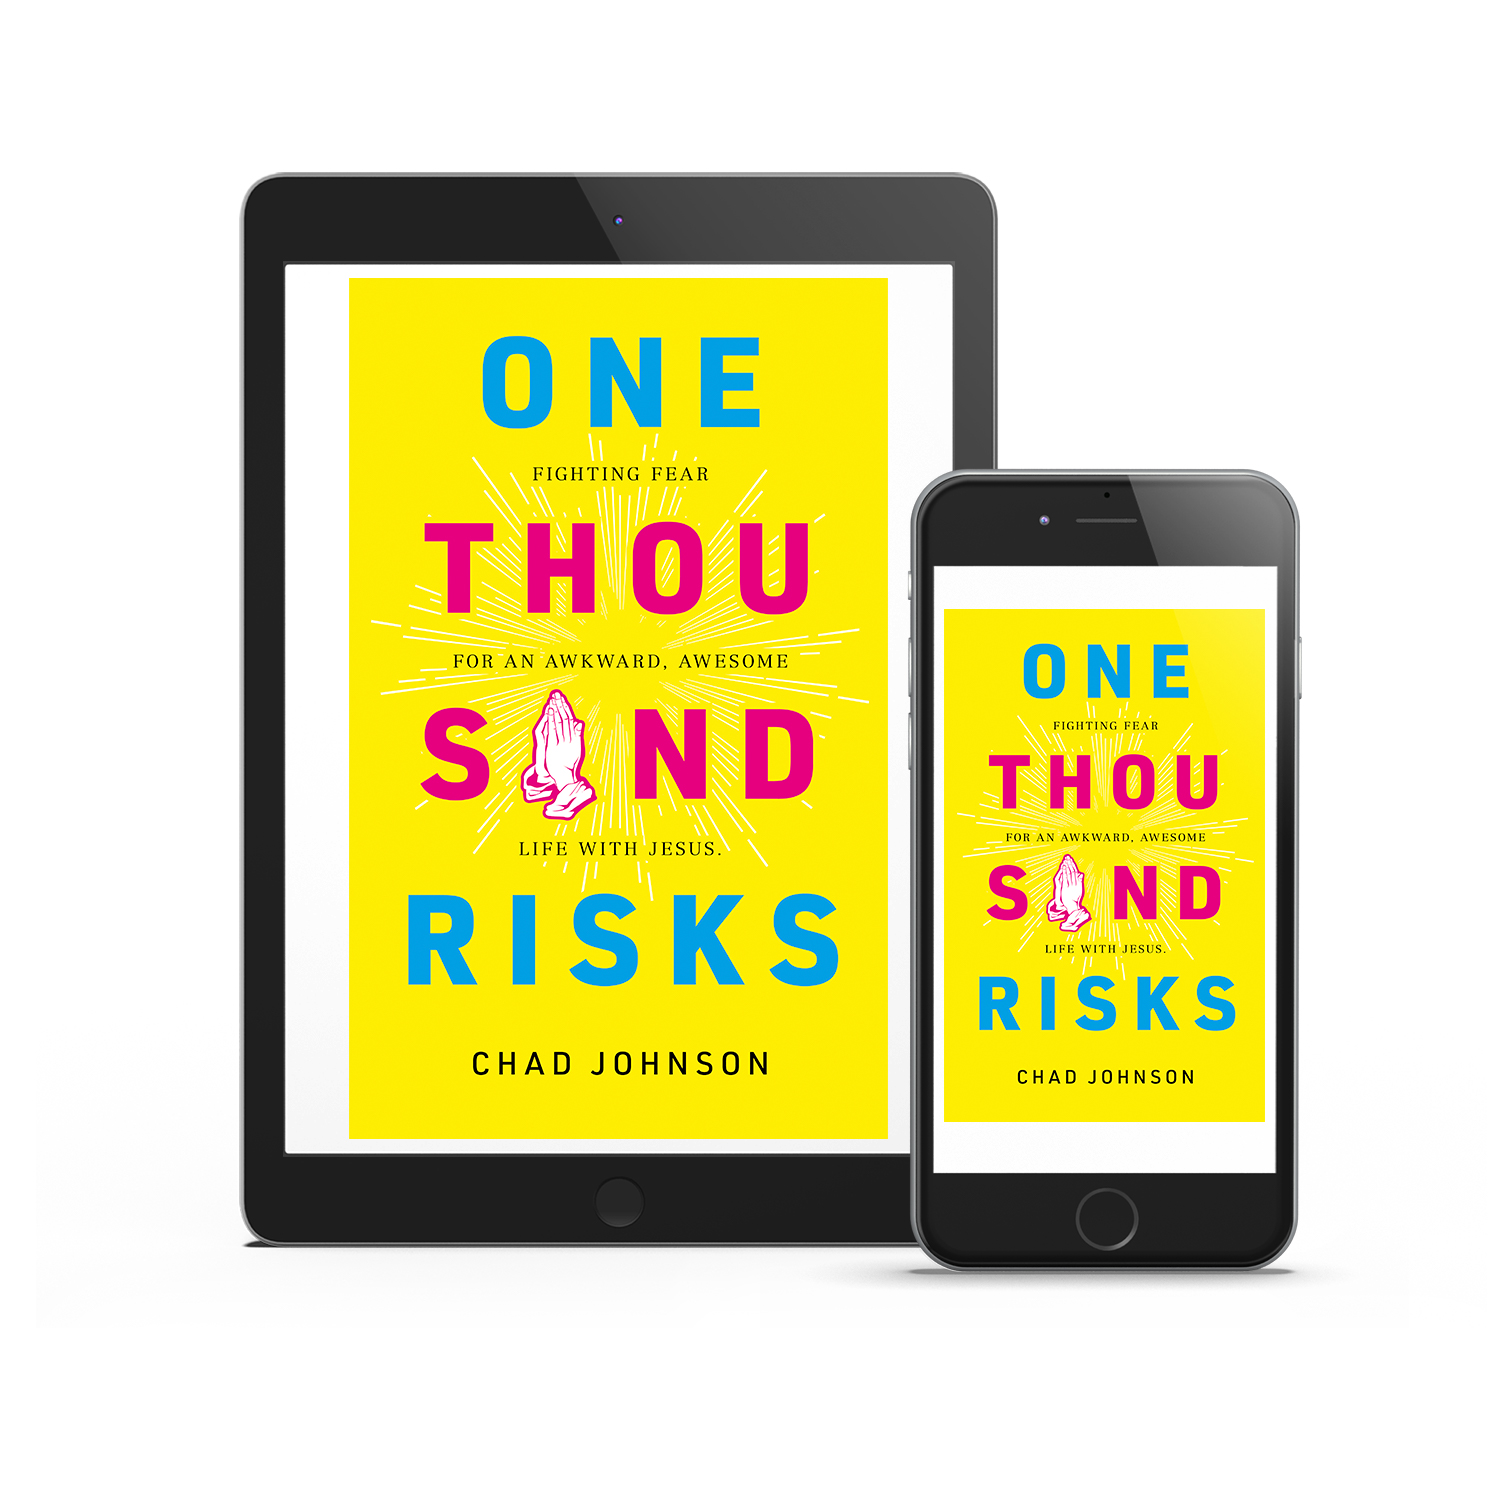 'One Thousand Risks' is an inspiring book about living a faith based life, by Chad Johnson. The book cover and interior were designed by Mark Thomas, of coverness.com. To find out more about my book design services, please visit www.coverness.com.